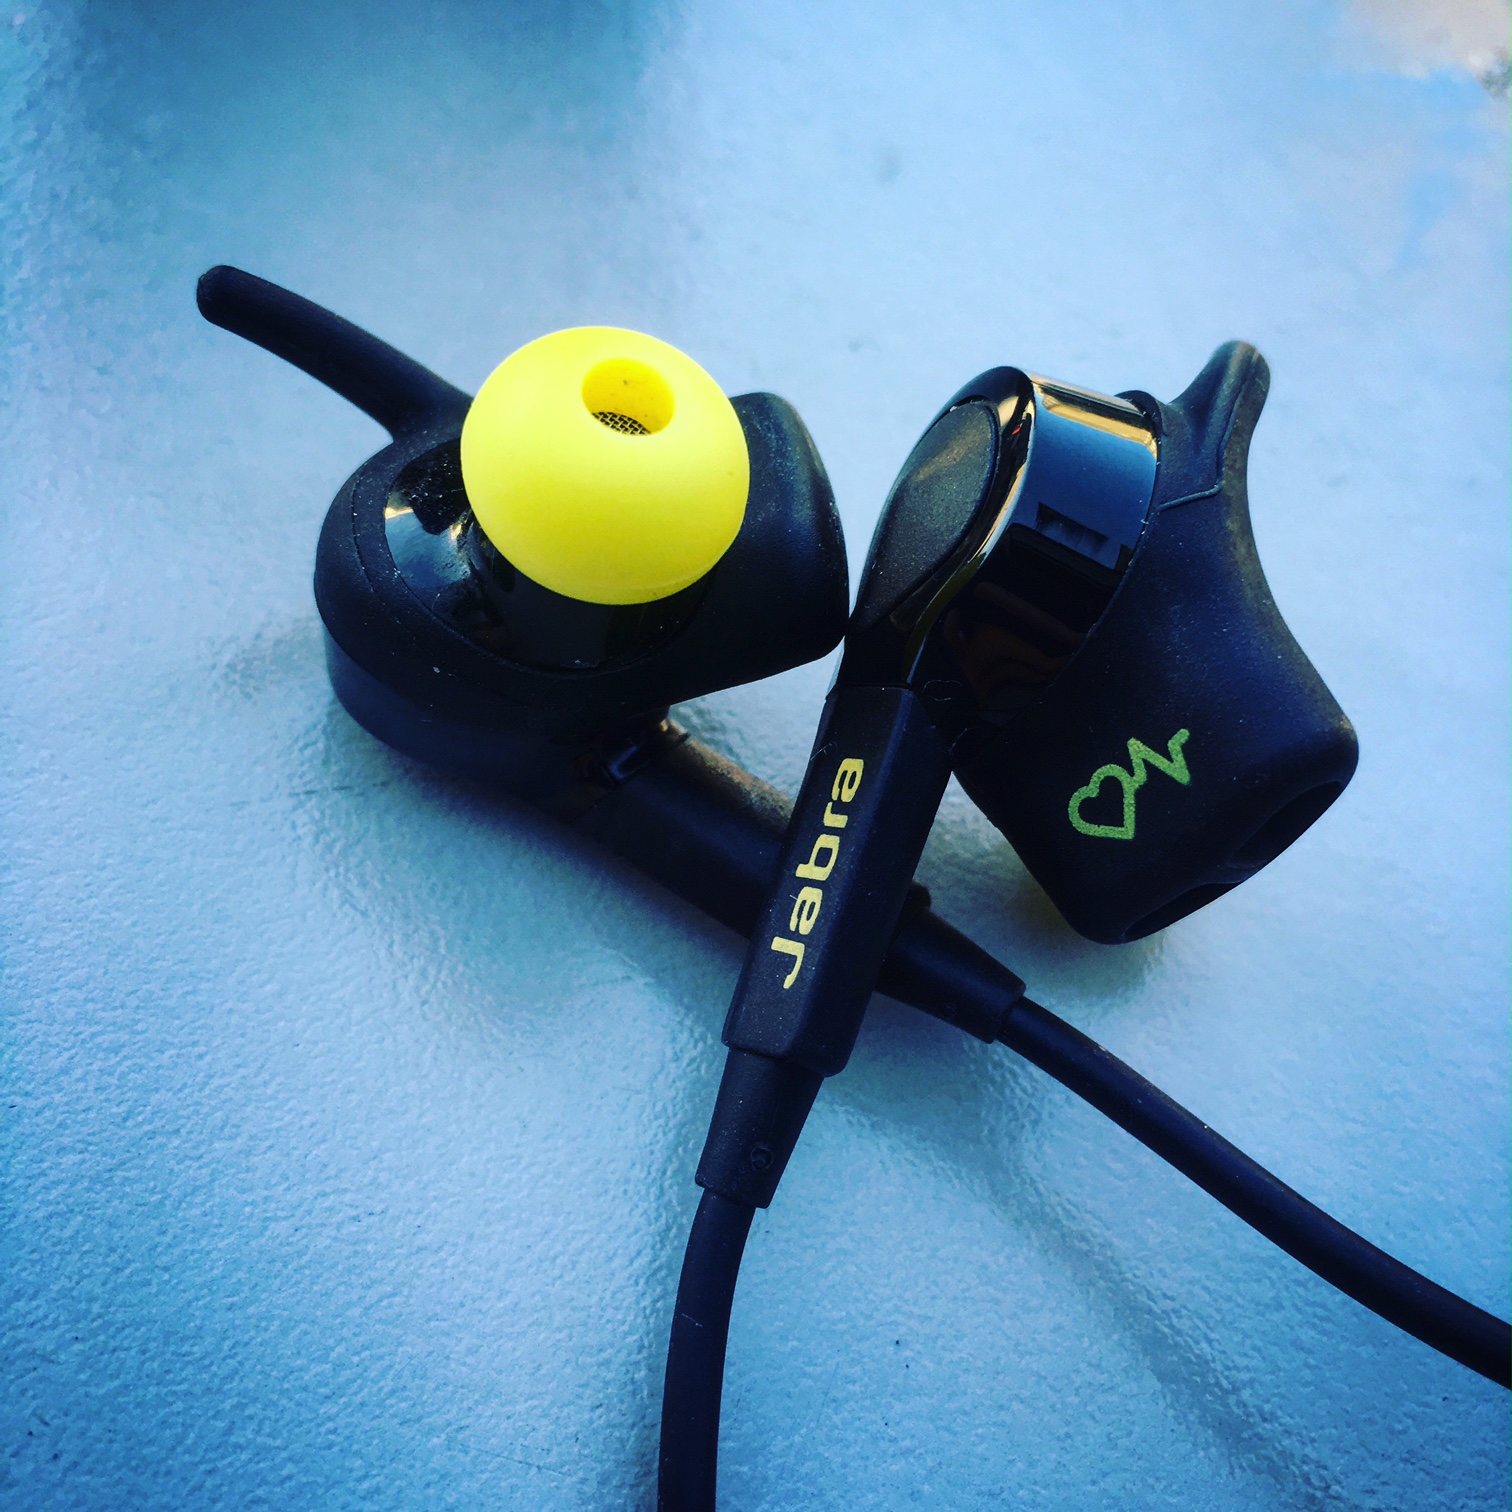 FitBits | JABRA bluetooth earphones review  - Tess Agnew fitness blogger